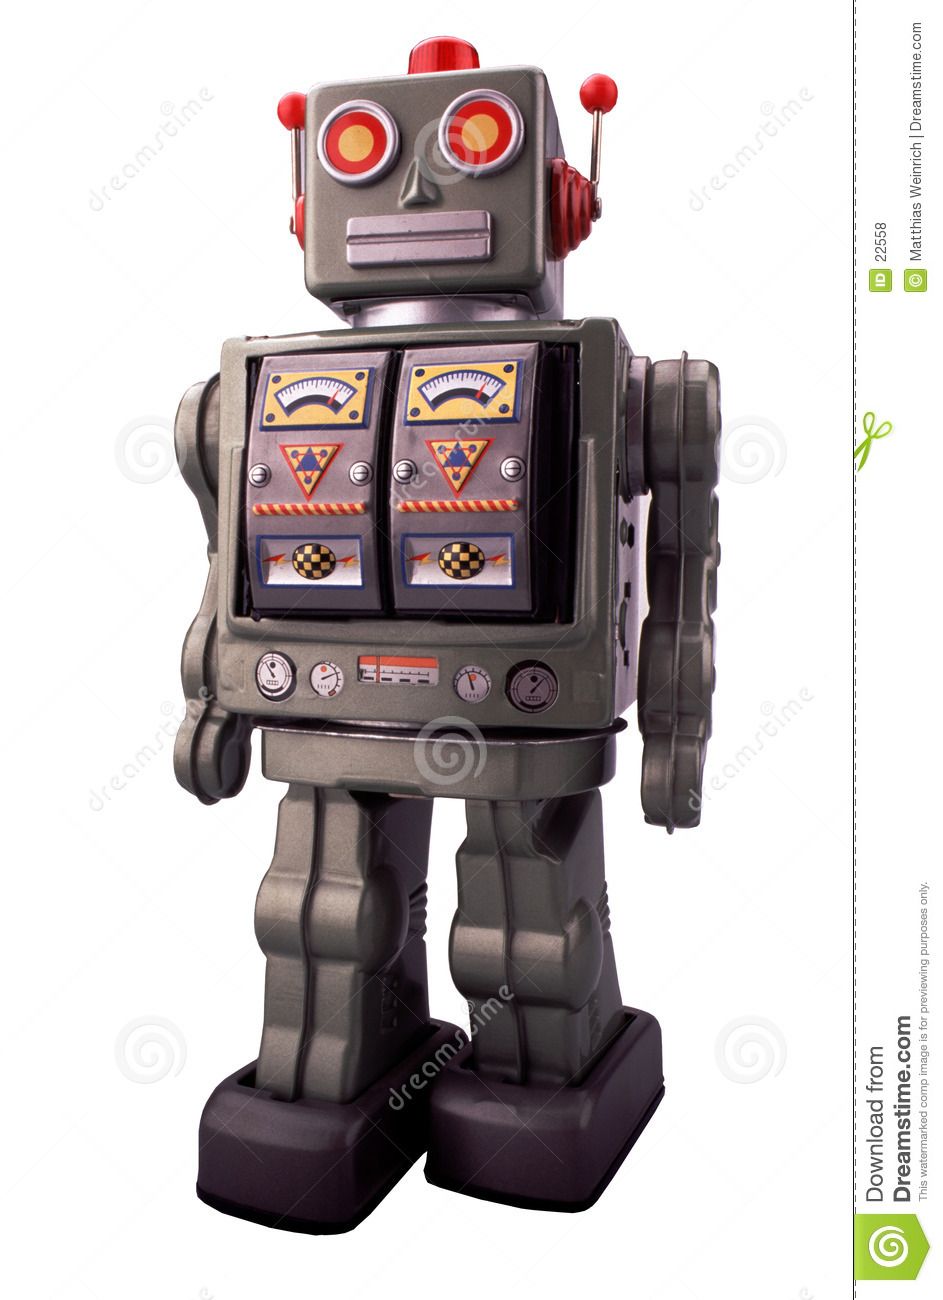 Image Of Robots Toy Robot From The 70s On White Background No